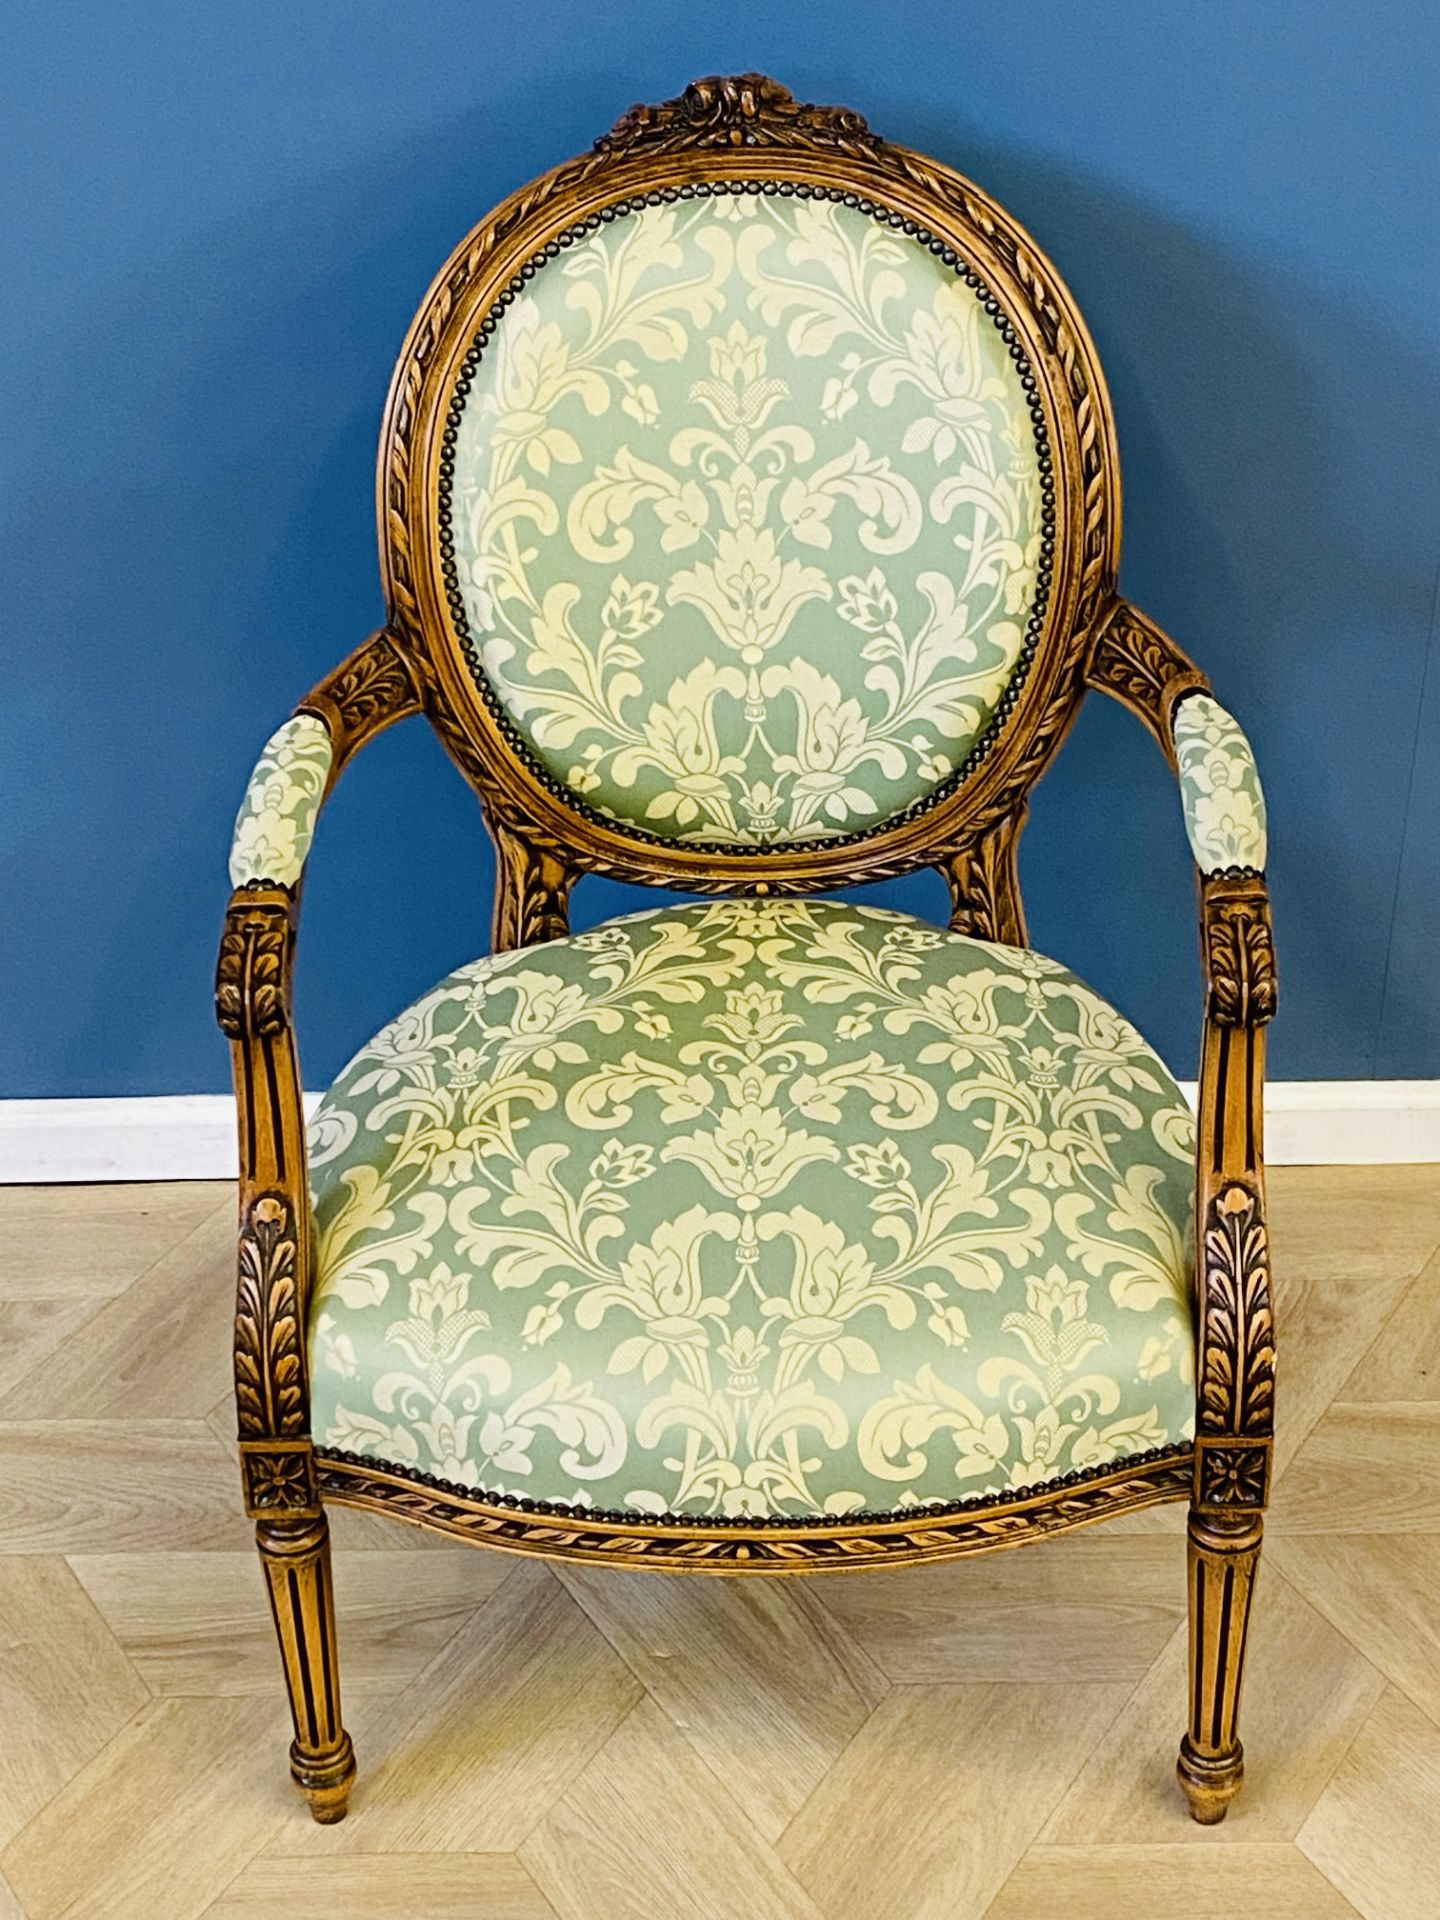 Carved French style open armchair